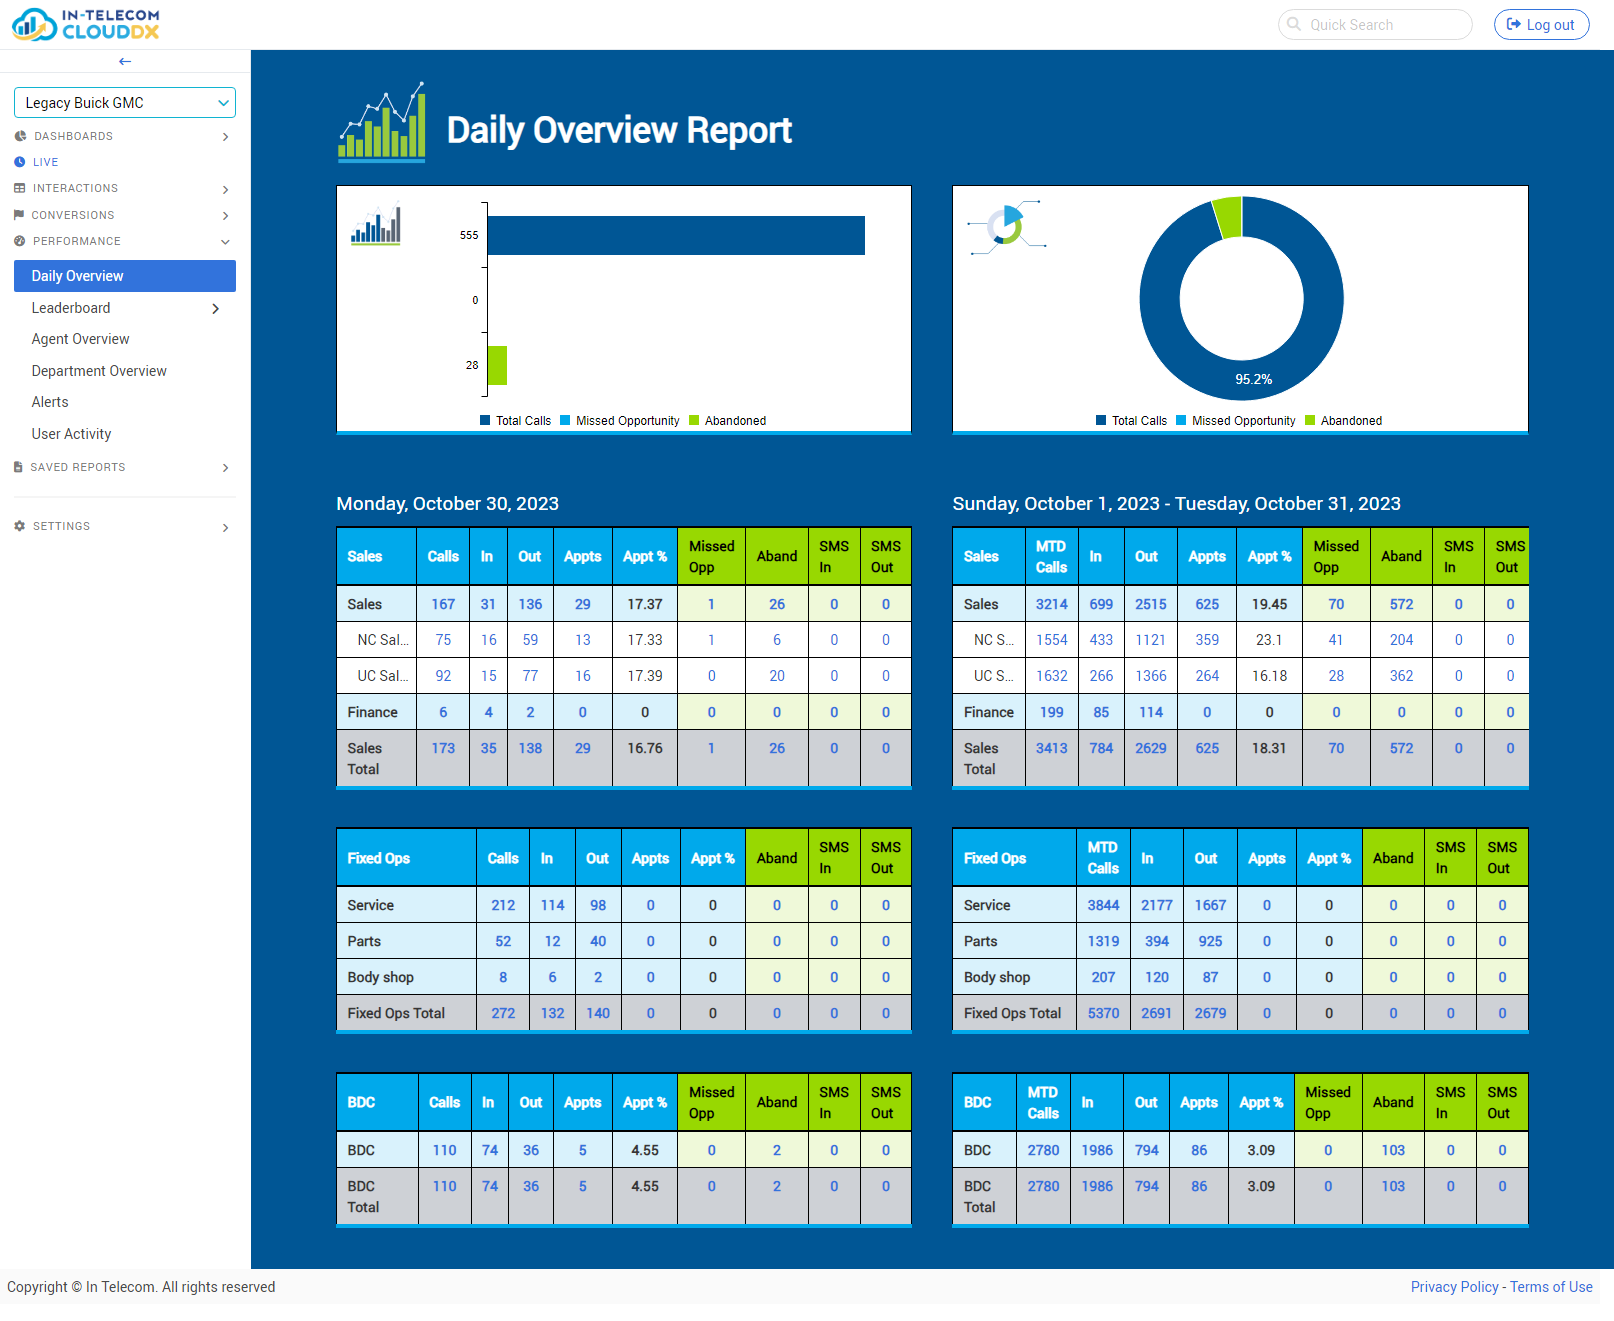 Stay on top of your sales and service departments with daily reporting across all departments.